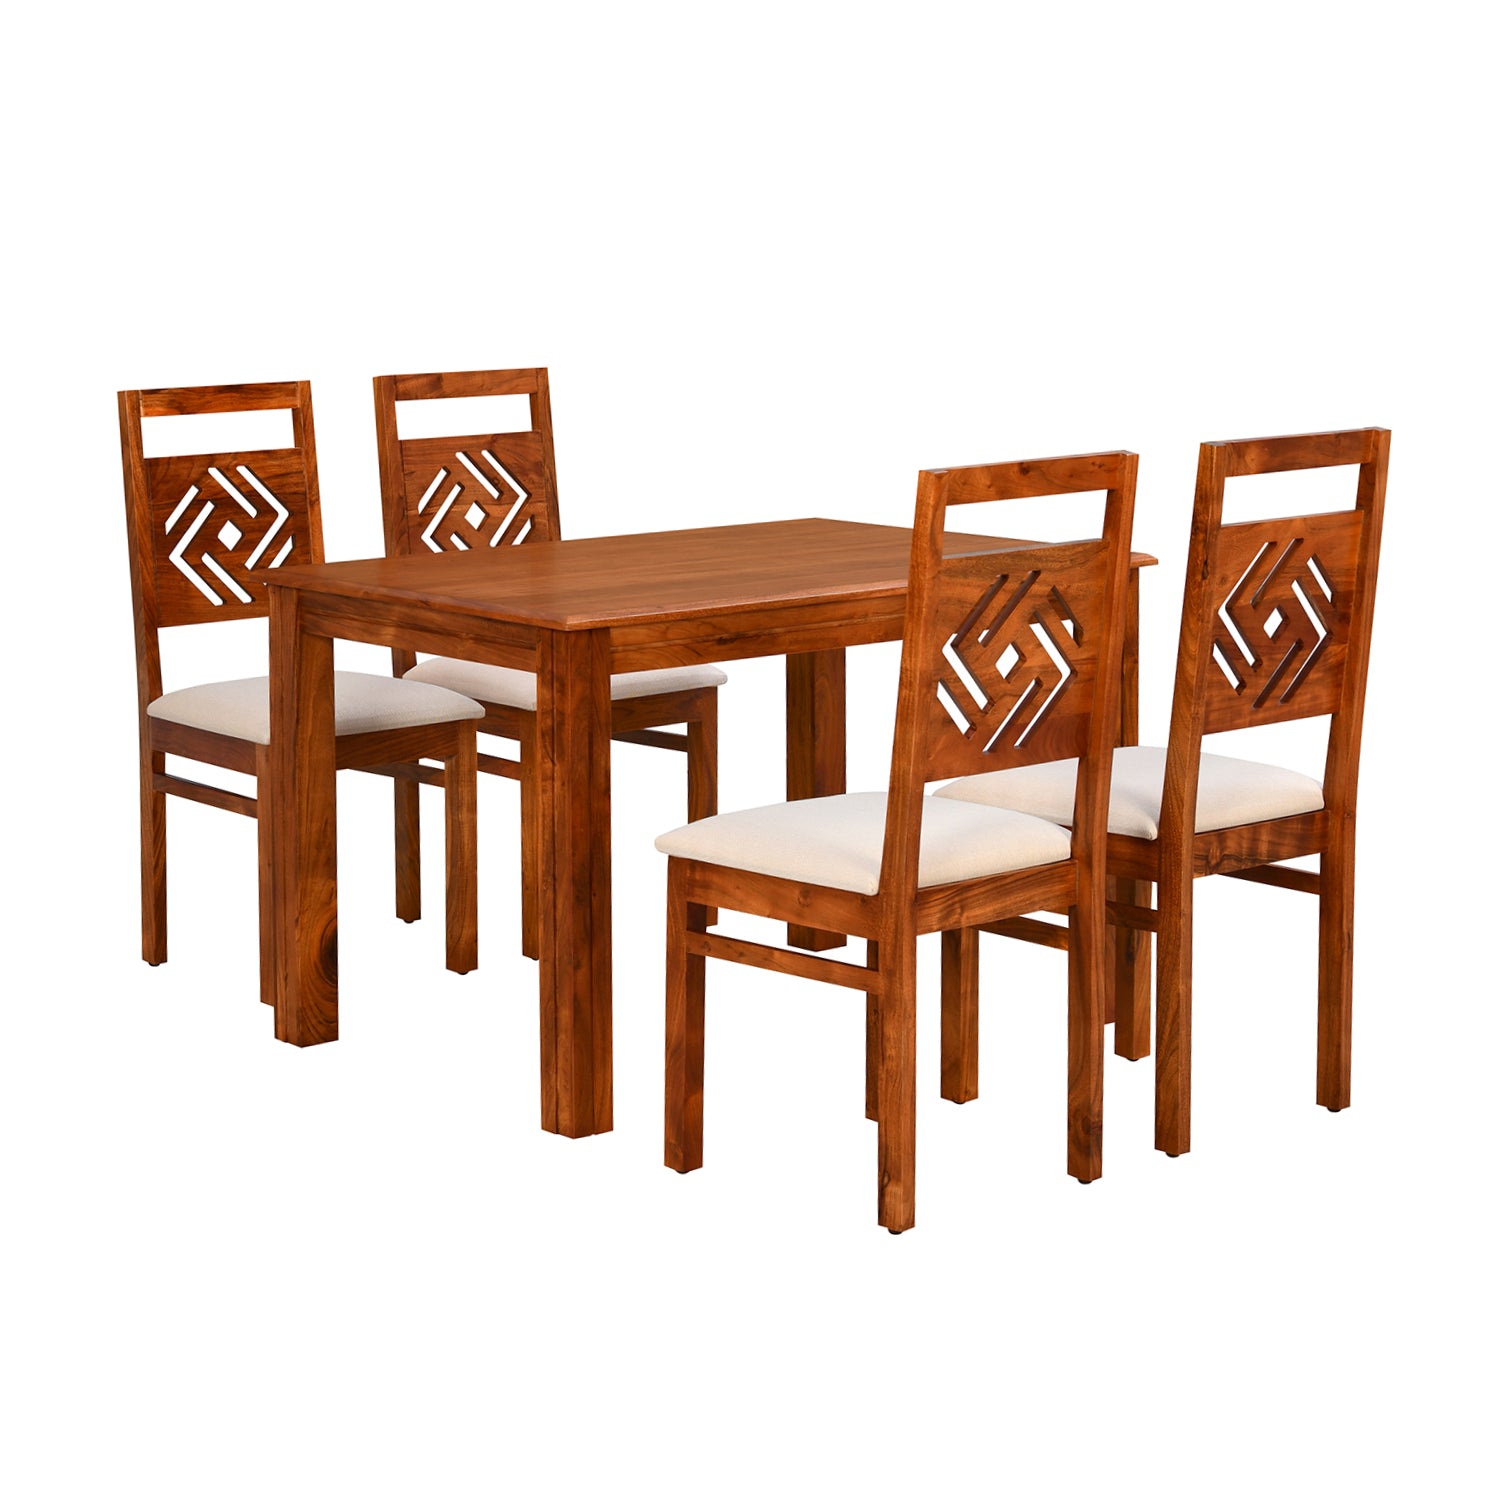 Cera 4 Seater Solid Wood Dining Set (Honey Brown)